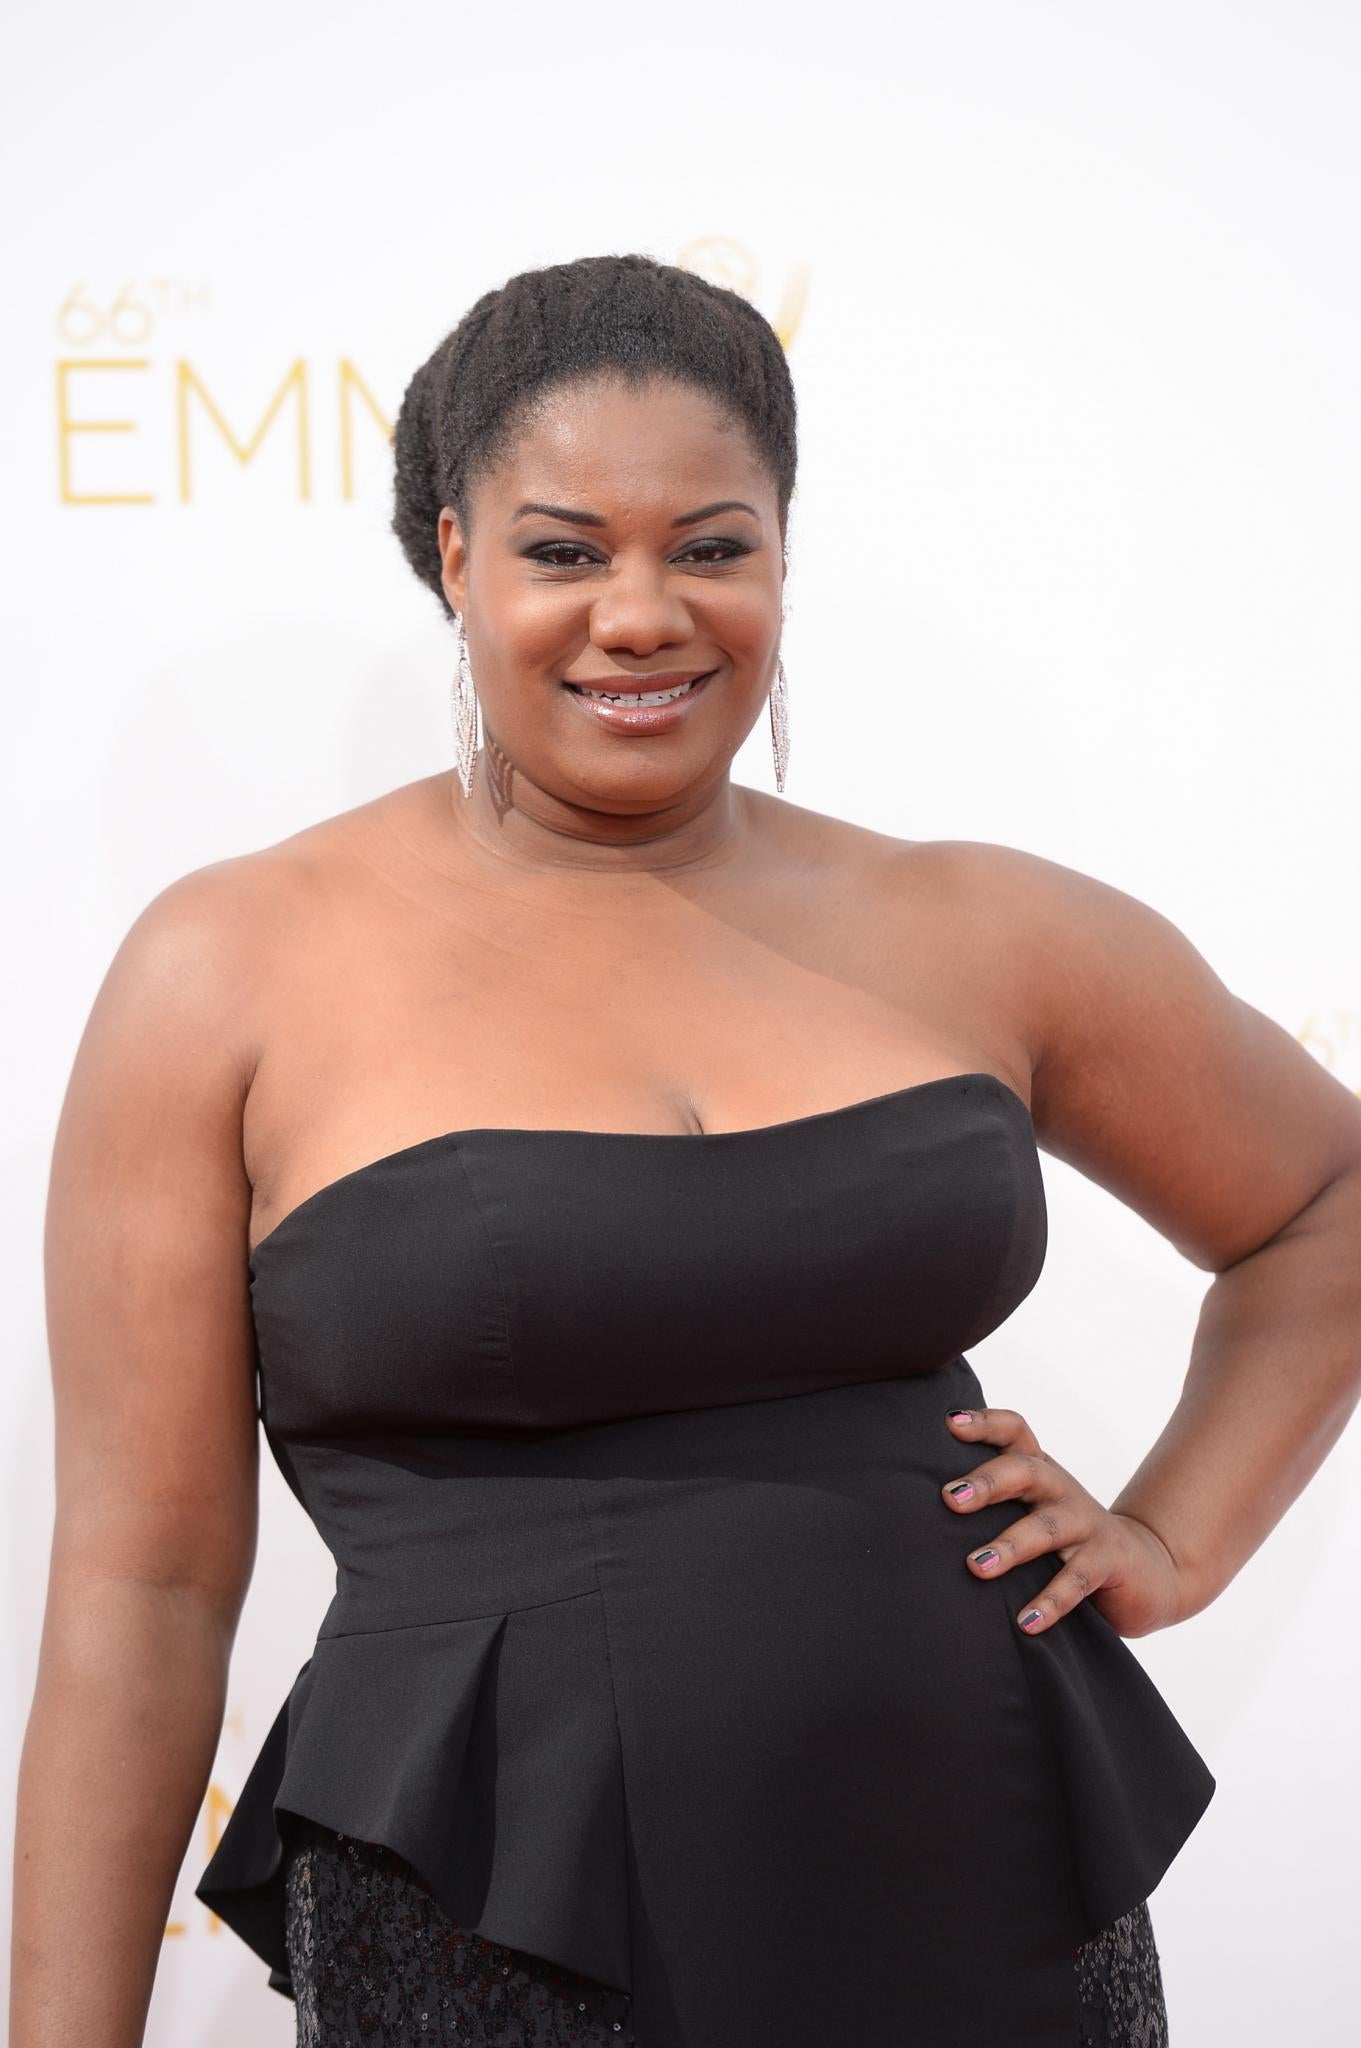 21 Things To Know About The Cast of 'Orange Is The New Black'
